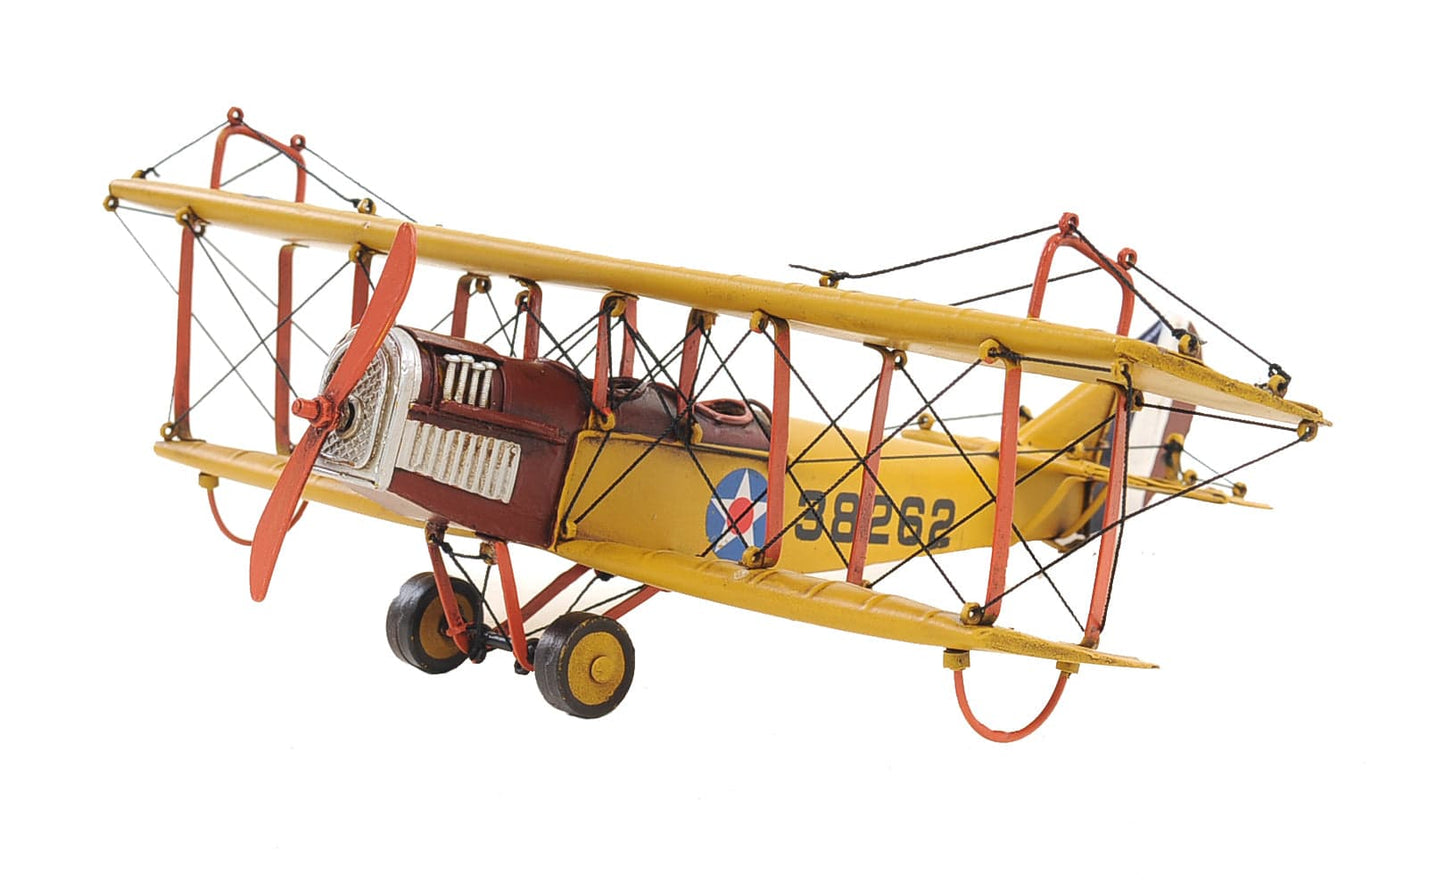 ALDO Creative Arts >Collectibles> Scale Model L: 11 W: 13.25 H: 4 Inches / NEW / Iron Airplane Yellow Curtiss JN-4 Jenny  Biplane Deck Top Metal Model